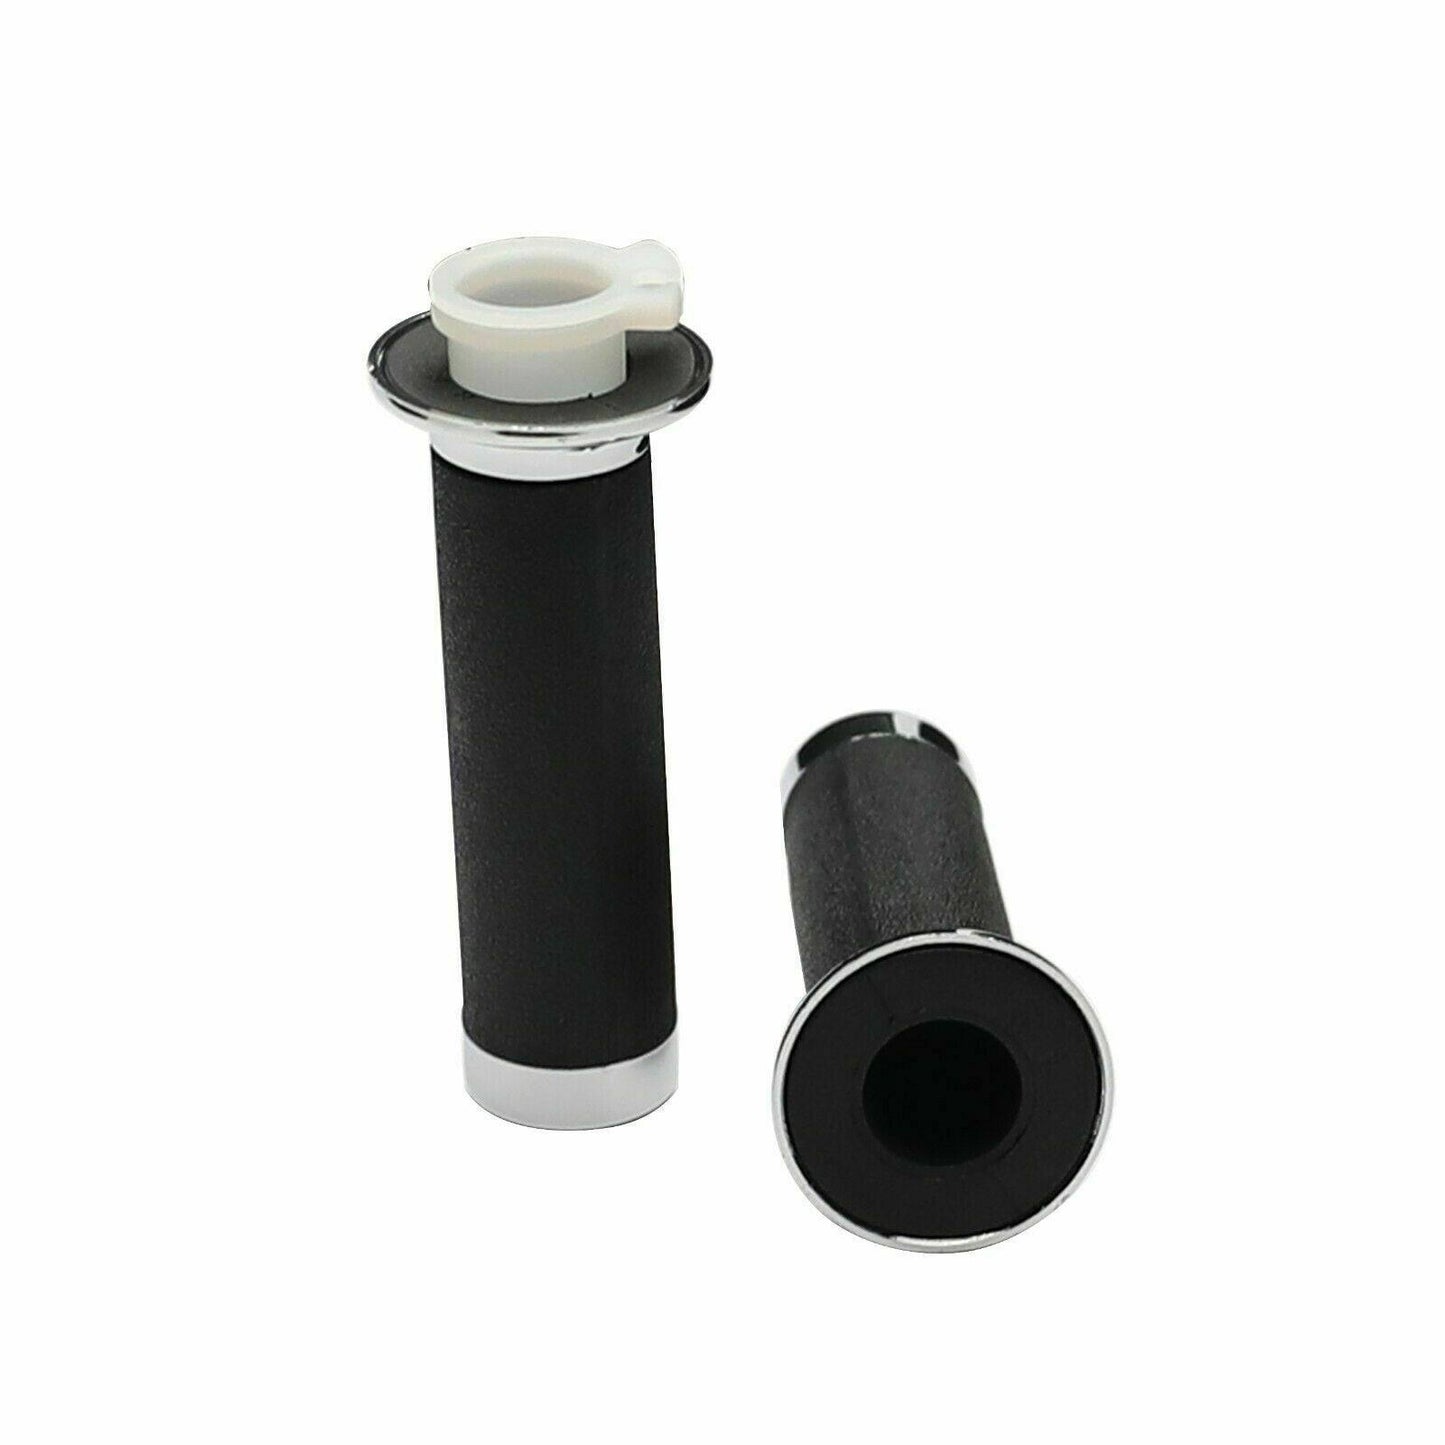 22mm Throttle Hand Grips Bar 2 Stroke for 49cc-80cc Engine Scooter Bike parts - TDRMOTO